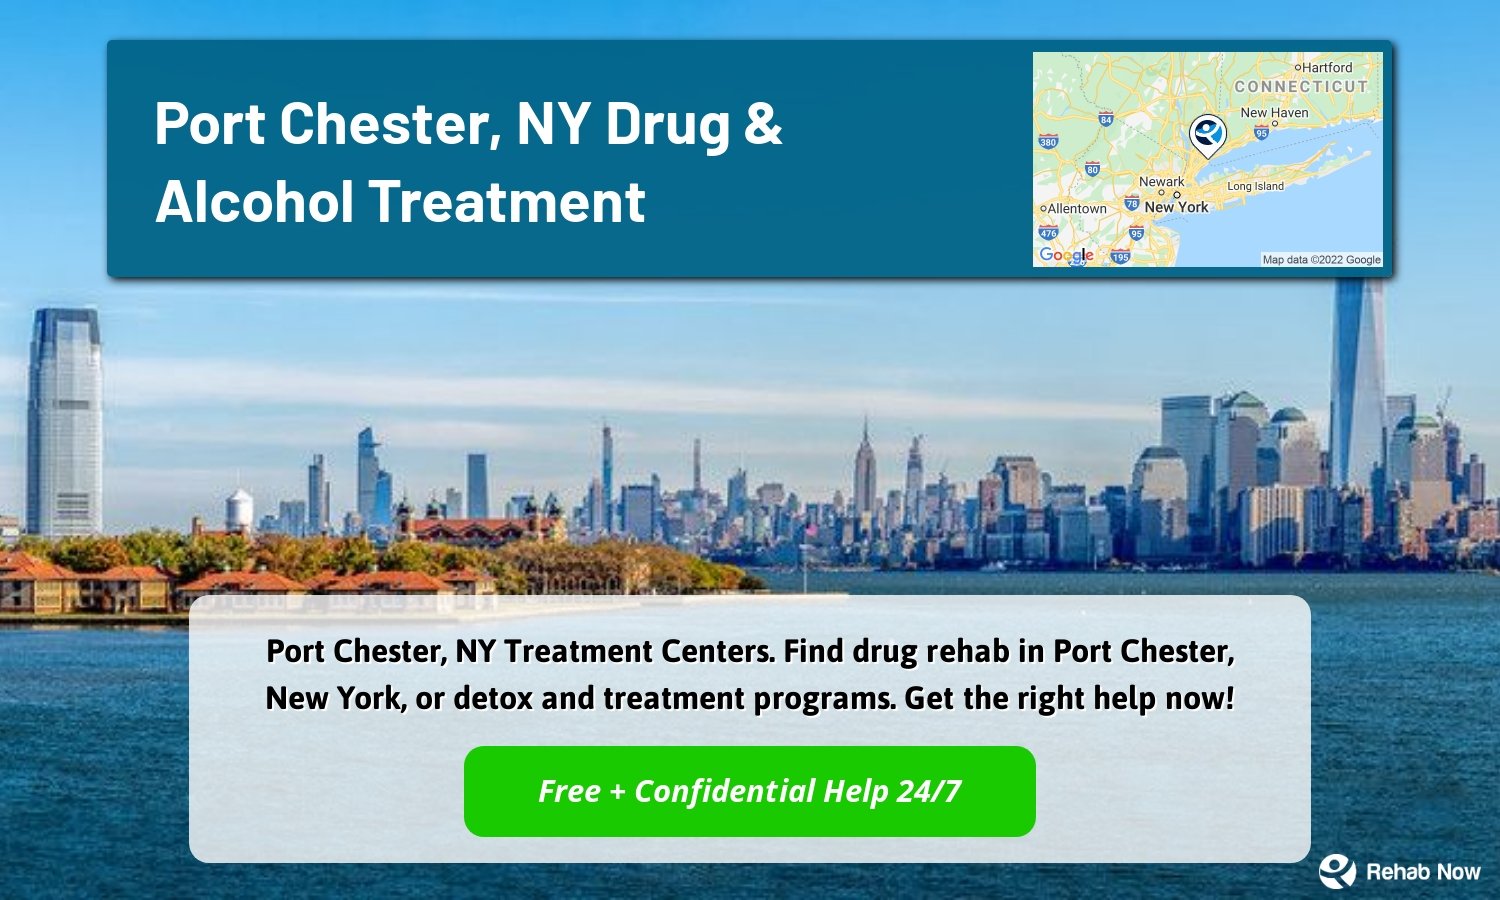 Port Chester, NY Treatment Centers. Find drug rehab in Port Chester, New York, or detox and treatment programs. Get the right help now!